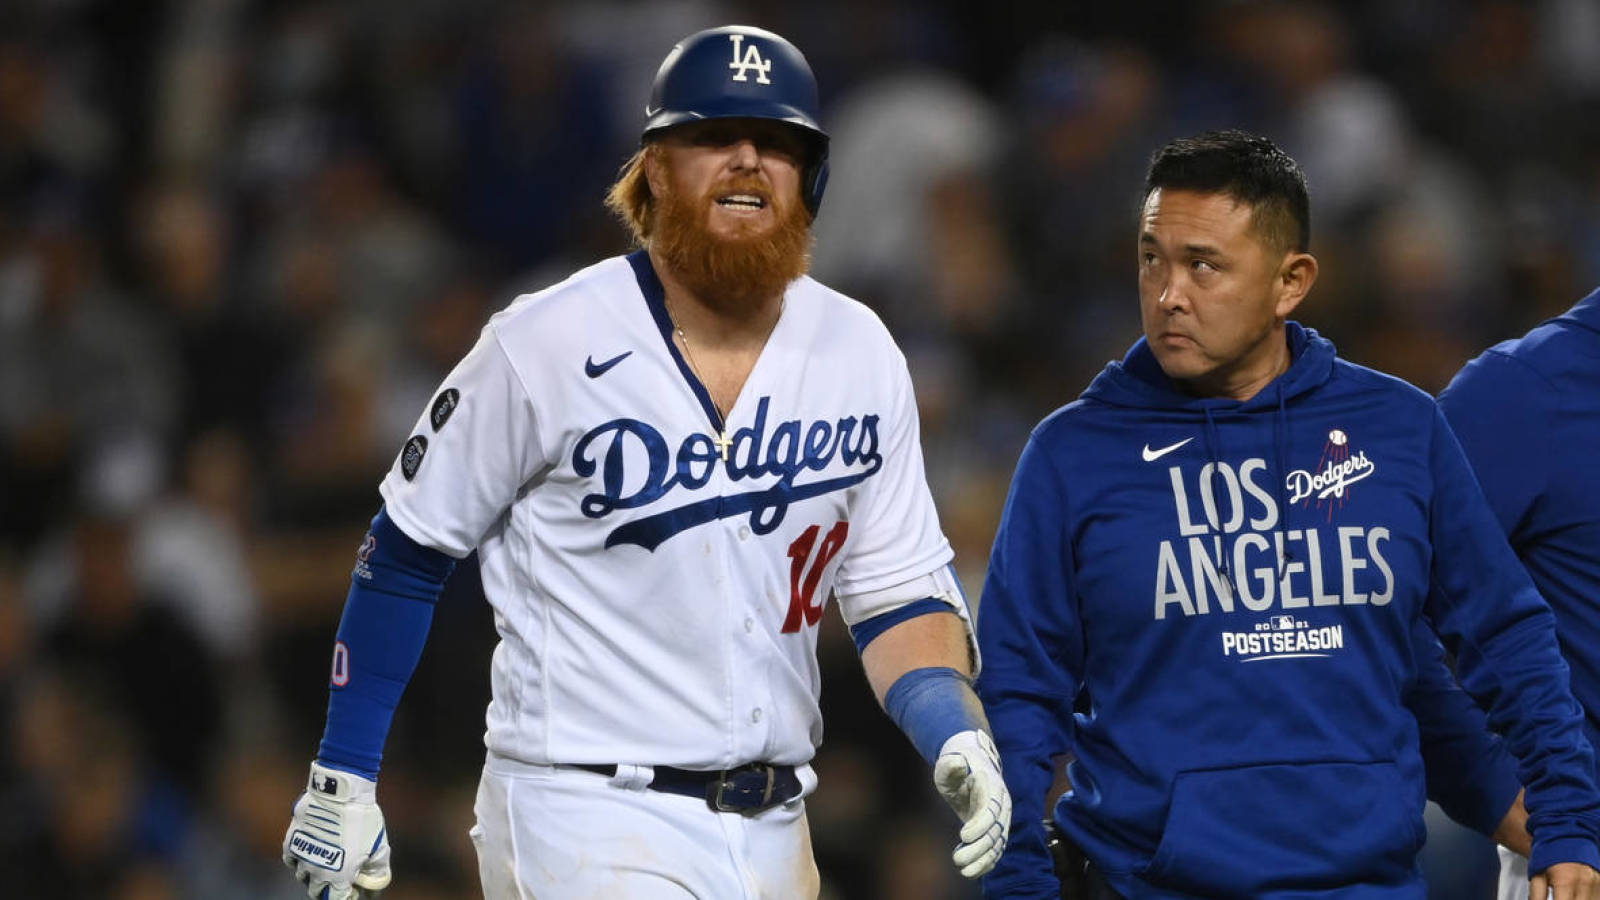 Dodgers' Turner likely done for postseason with hamstring injury